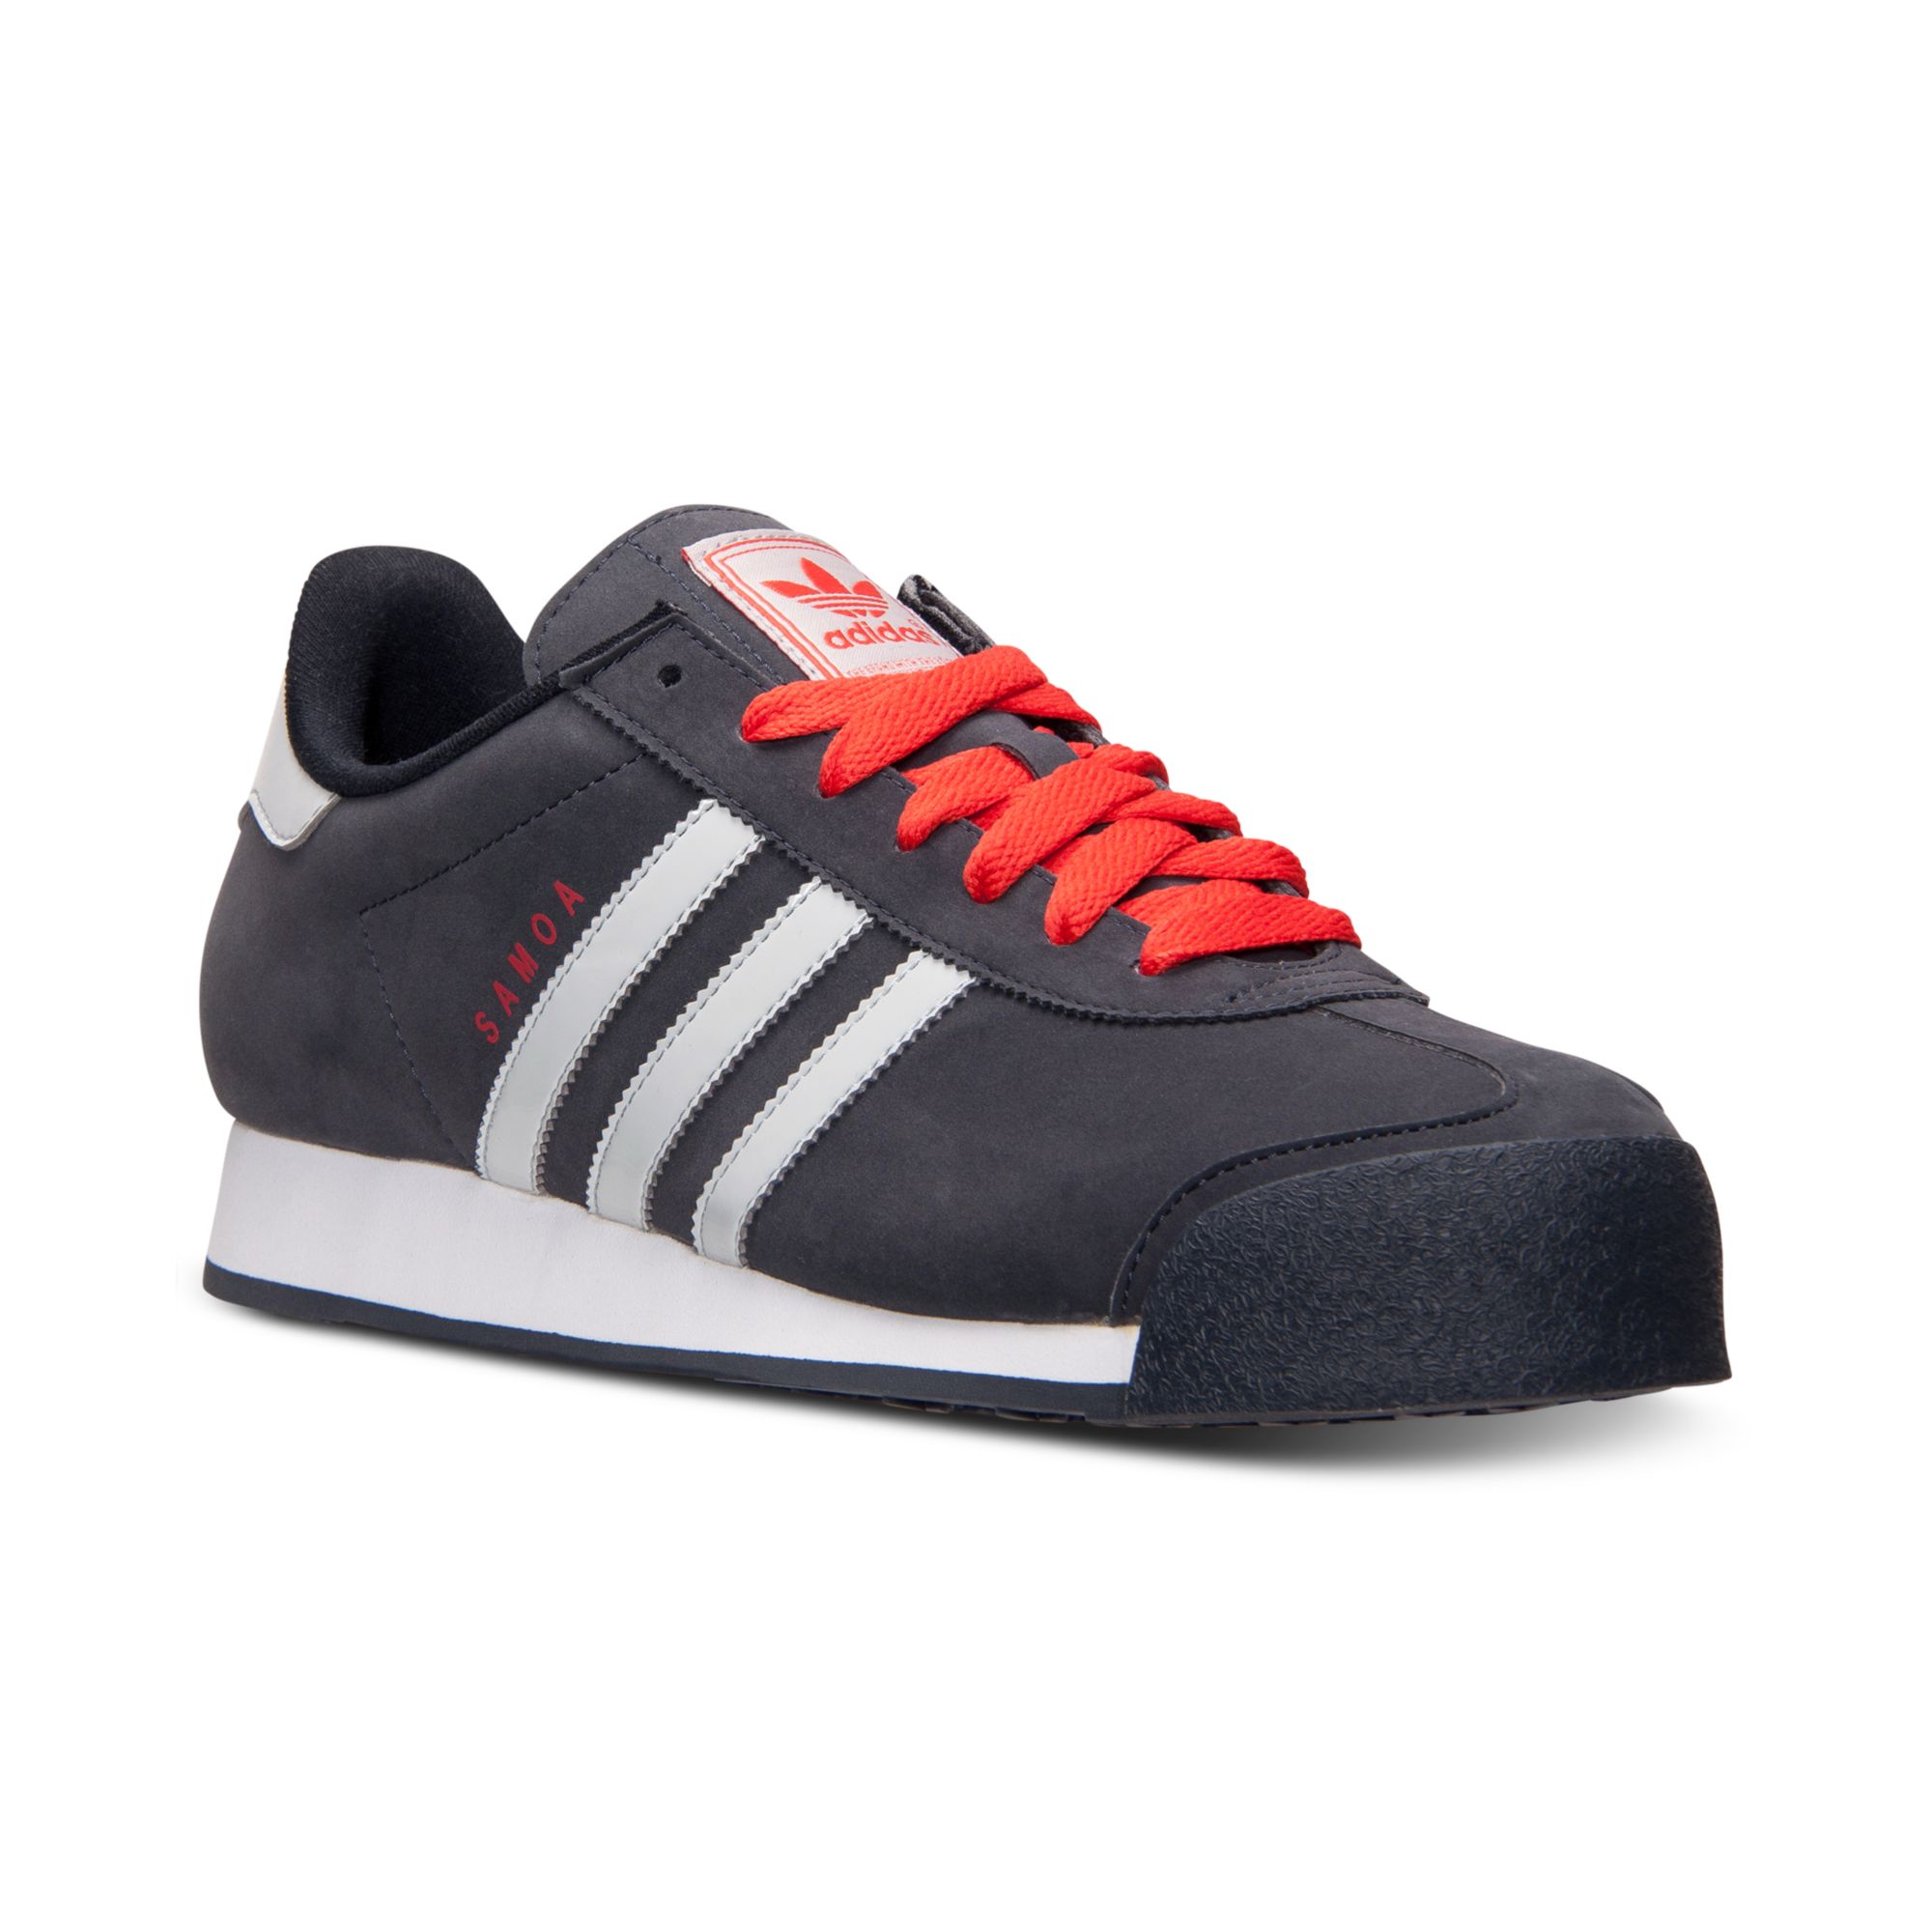 Adidas Women's Originals Samoa Casual Sneakers from Finish Line in Gray ...